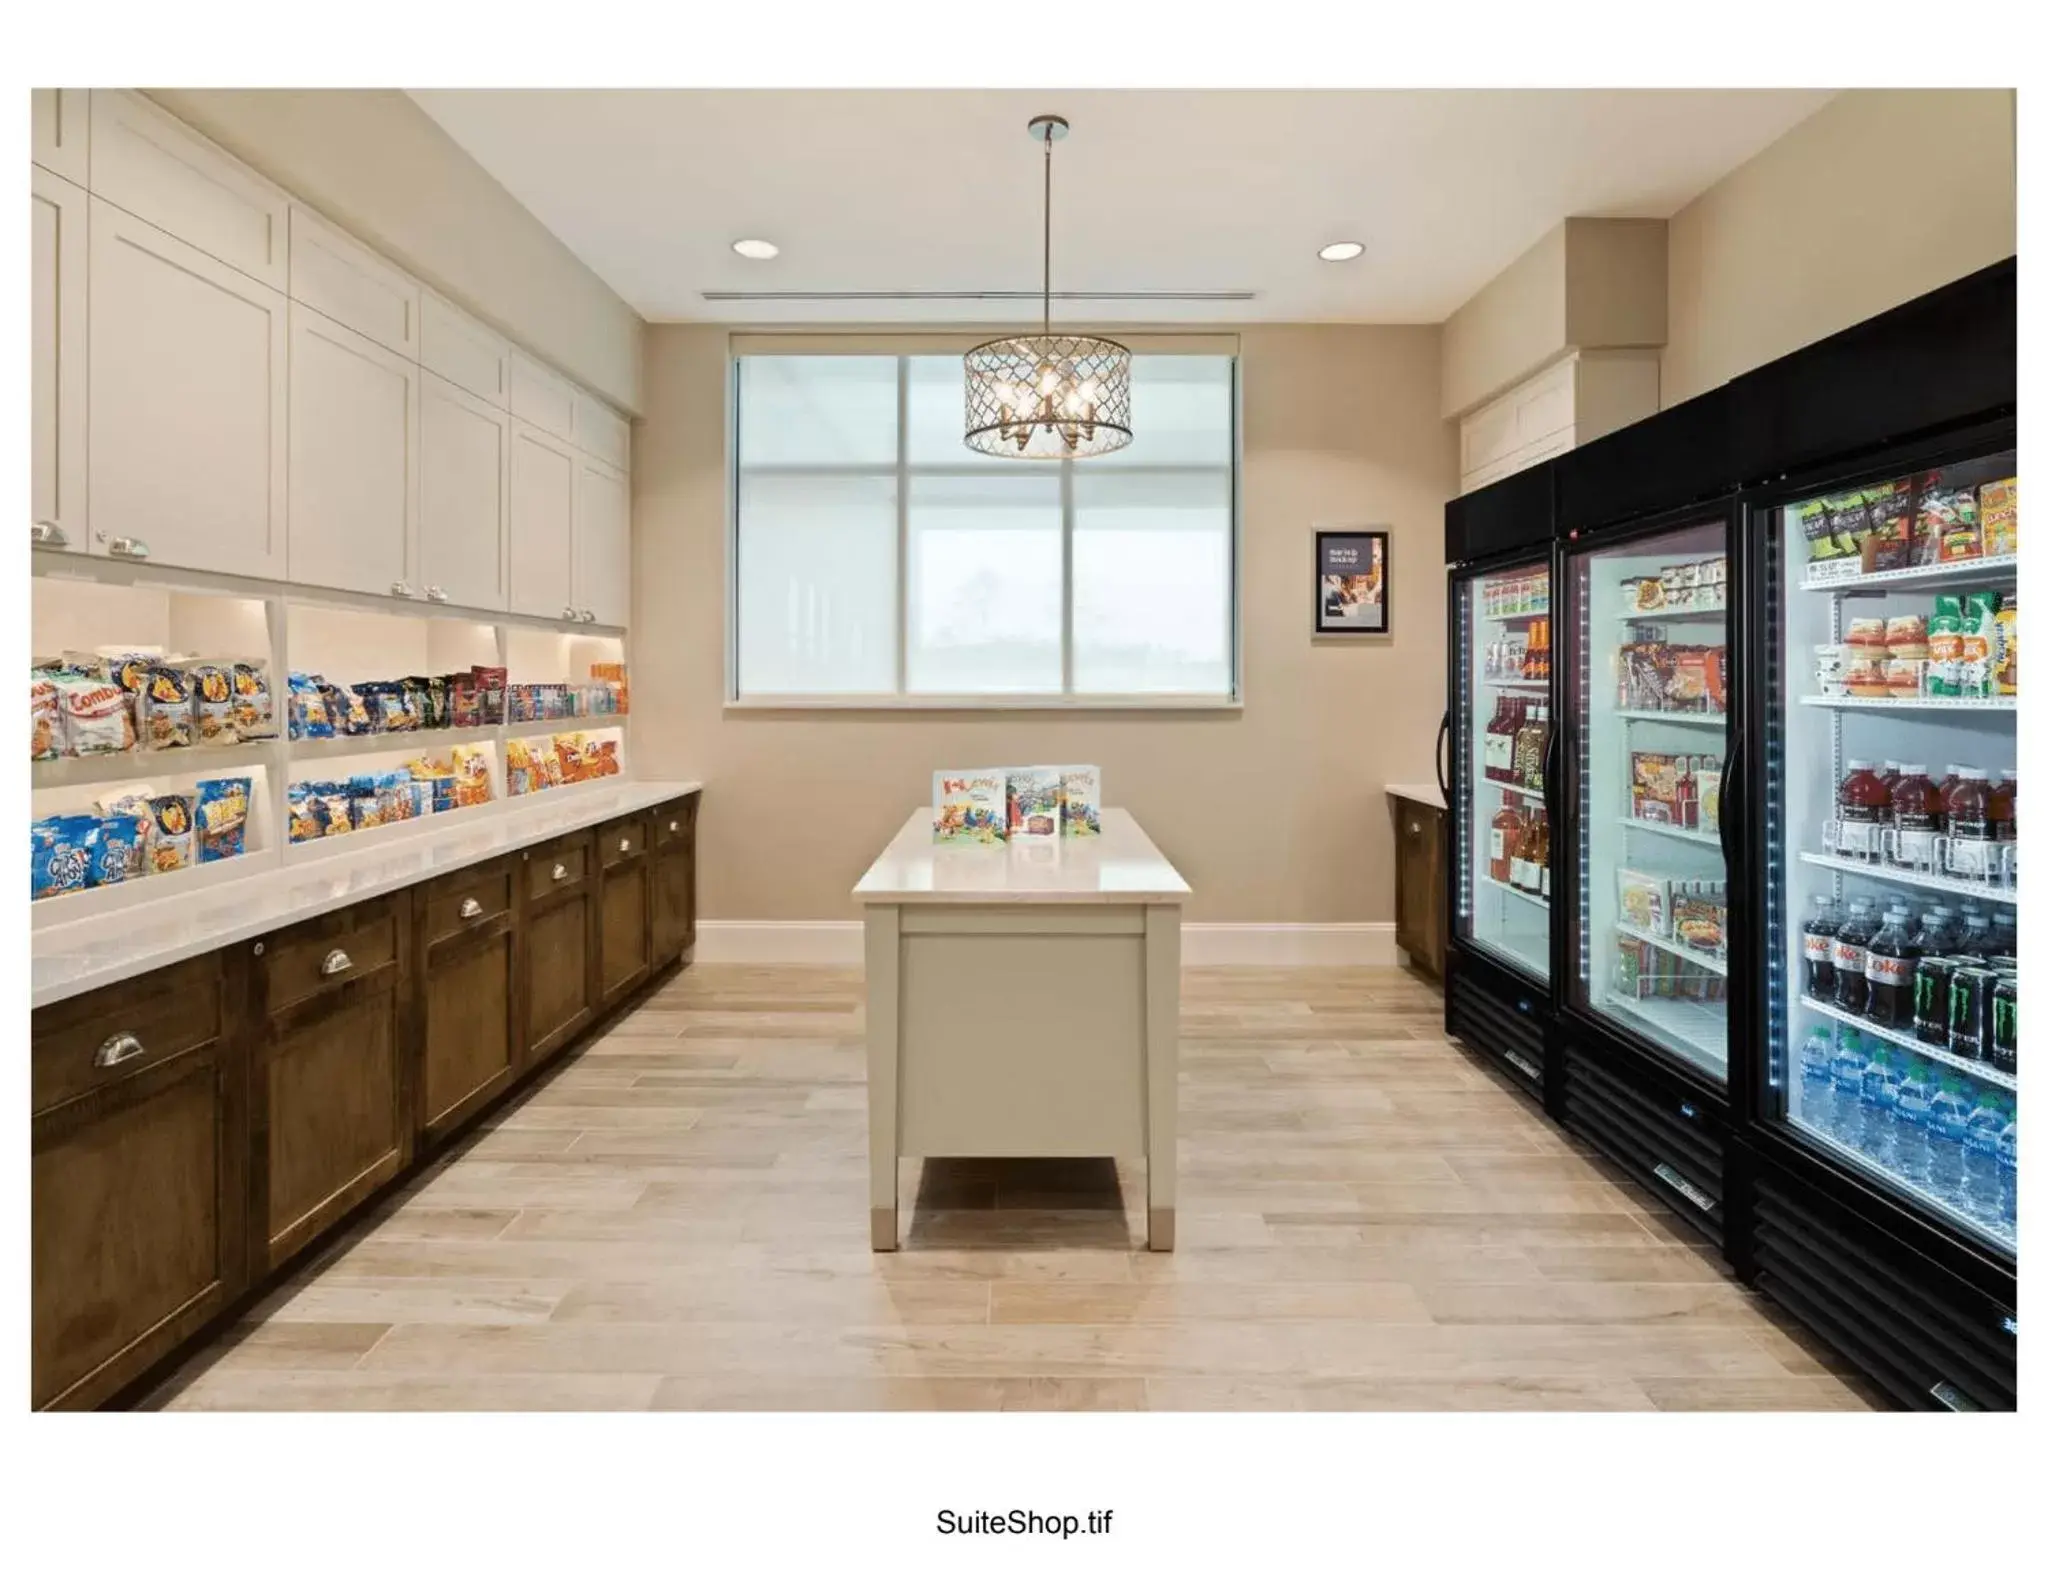 Supermarket/grocery shop in Homewood Suites By Hilton Panama City Beach, Fl